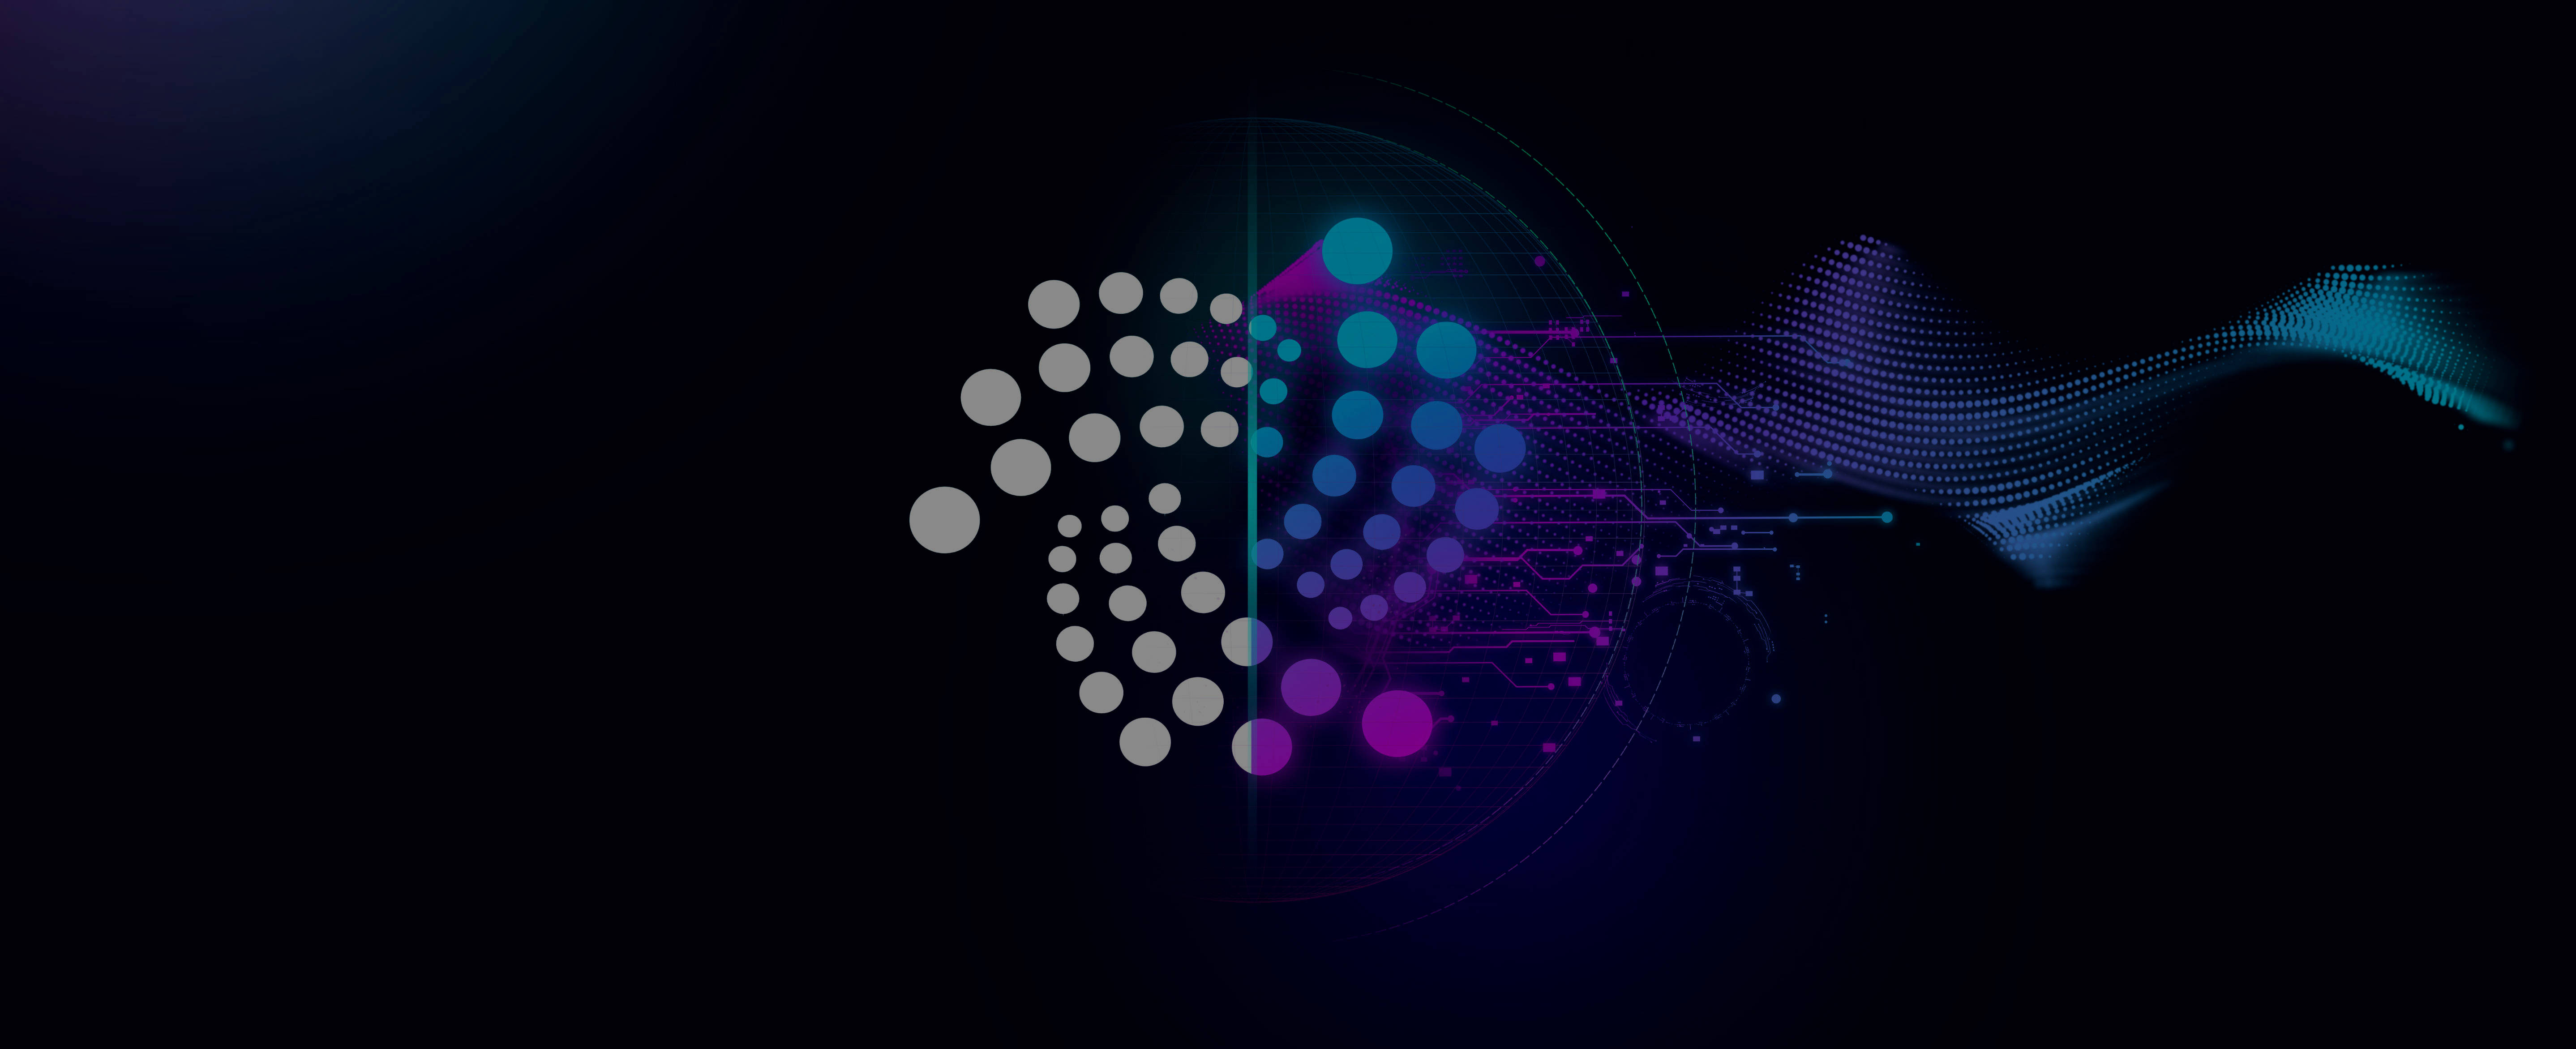 PR: IOTA & ITIC To Build a Global Alliance Of Smart Mobility Testbeds